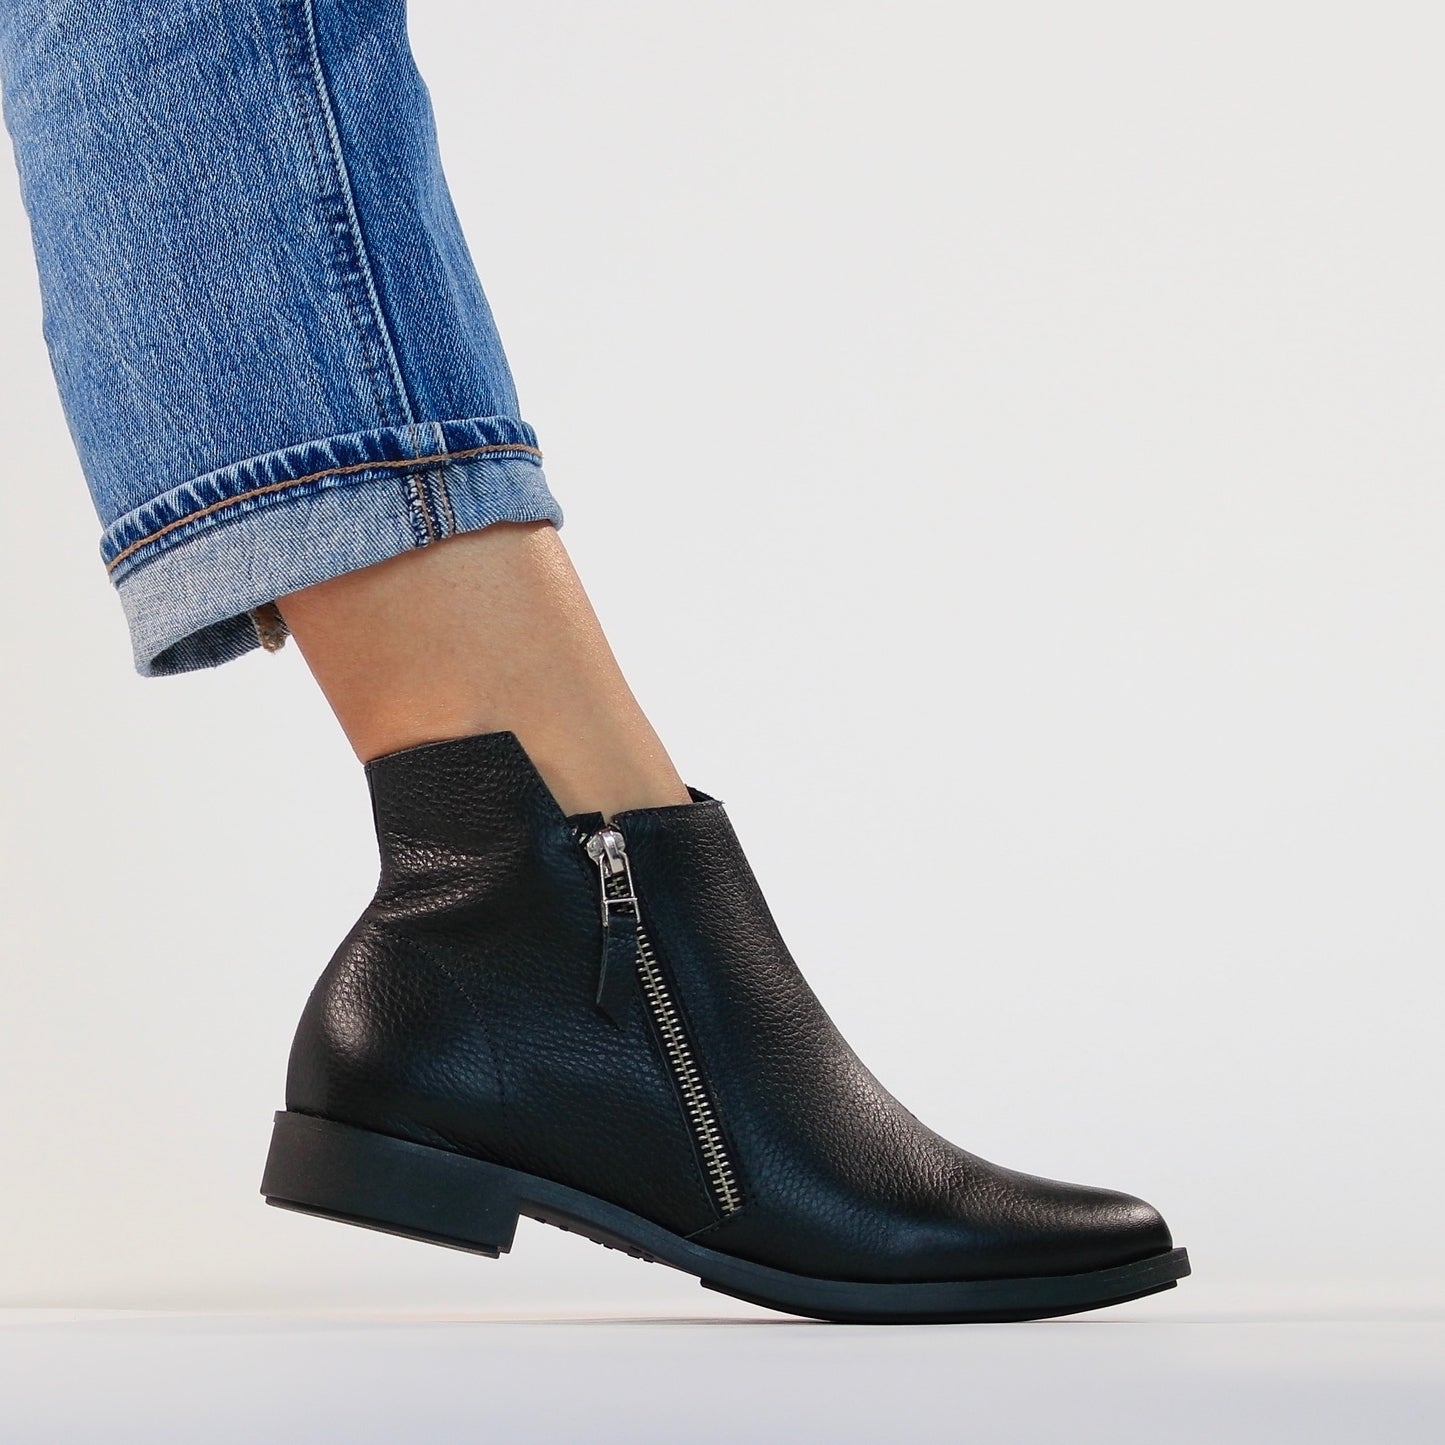 leather ankle boots for women